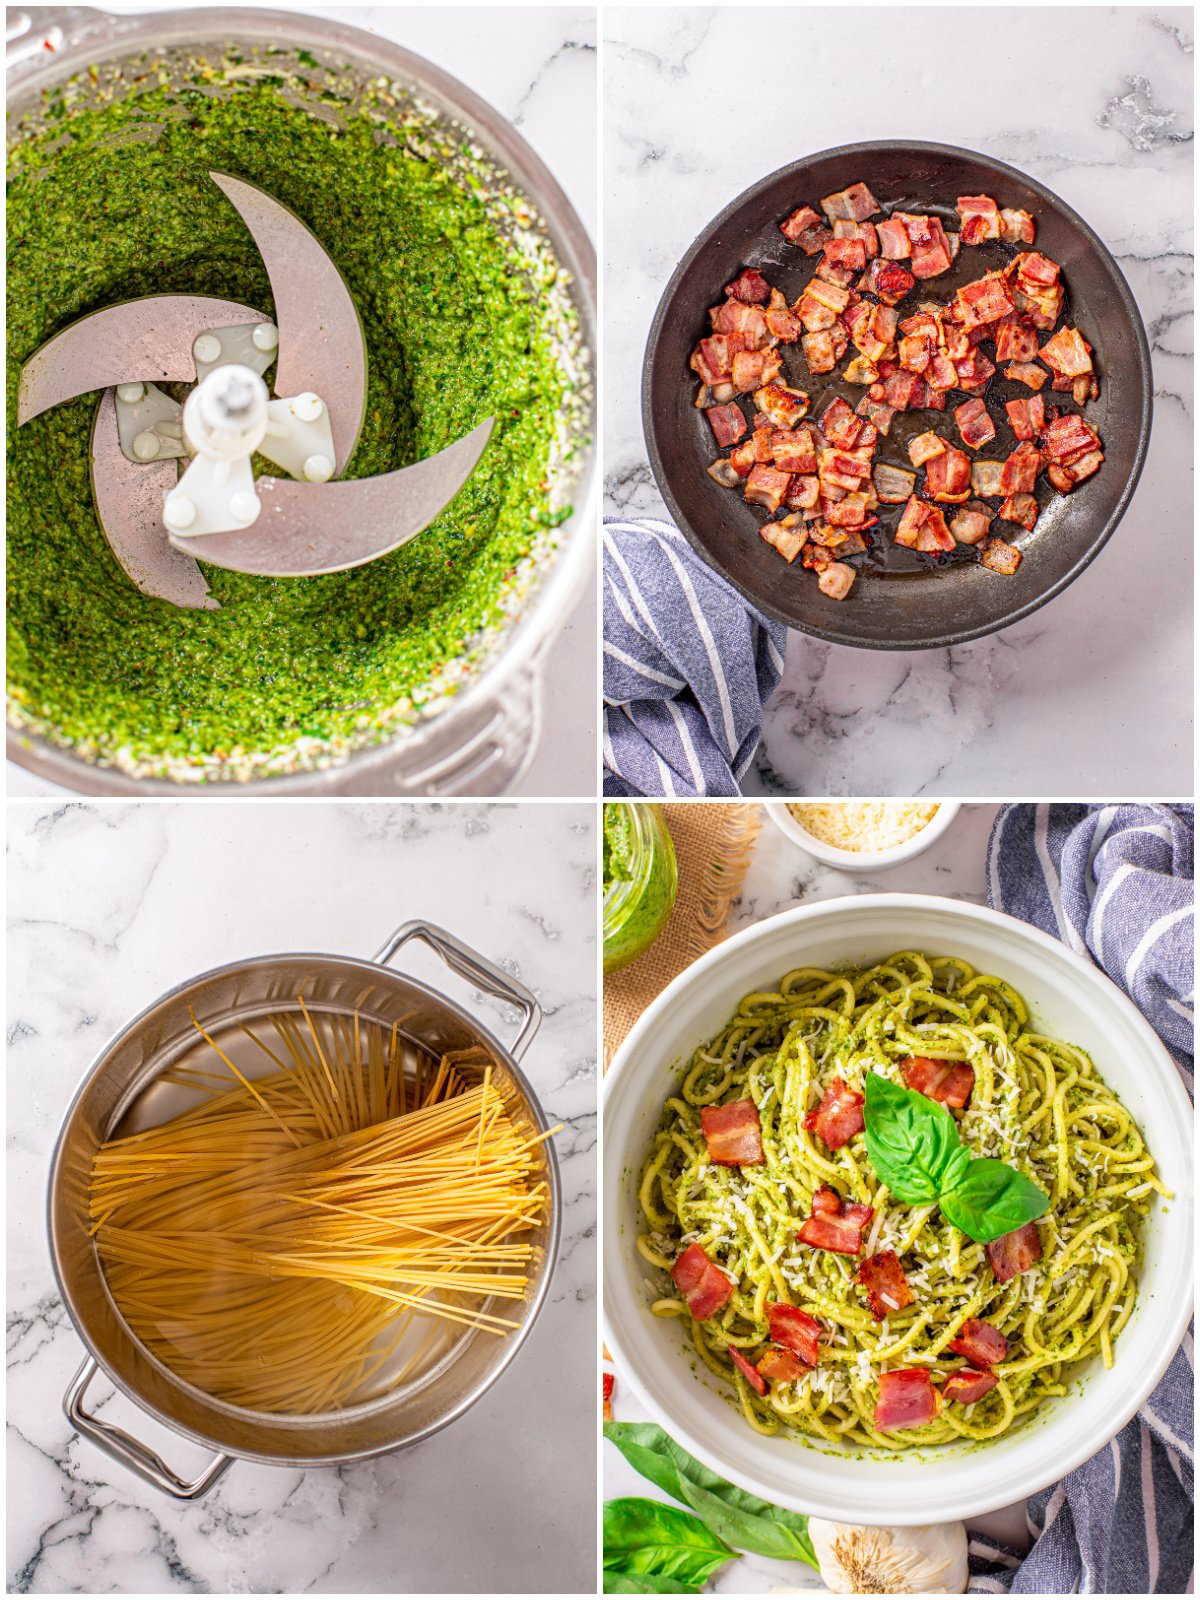 Step by step photos on how to make Bacon Pesto Pasta.